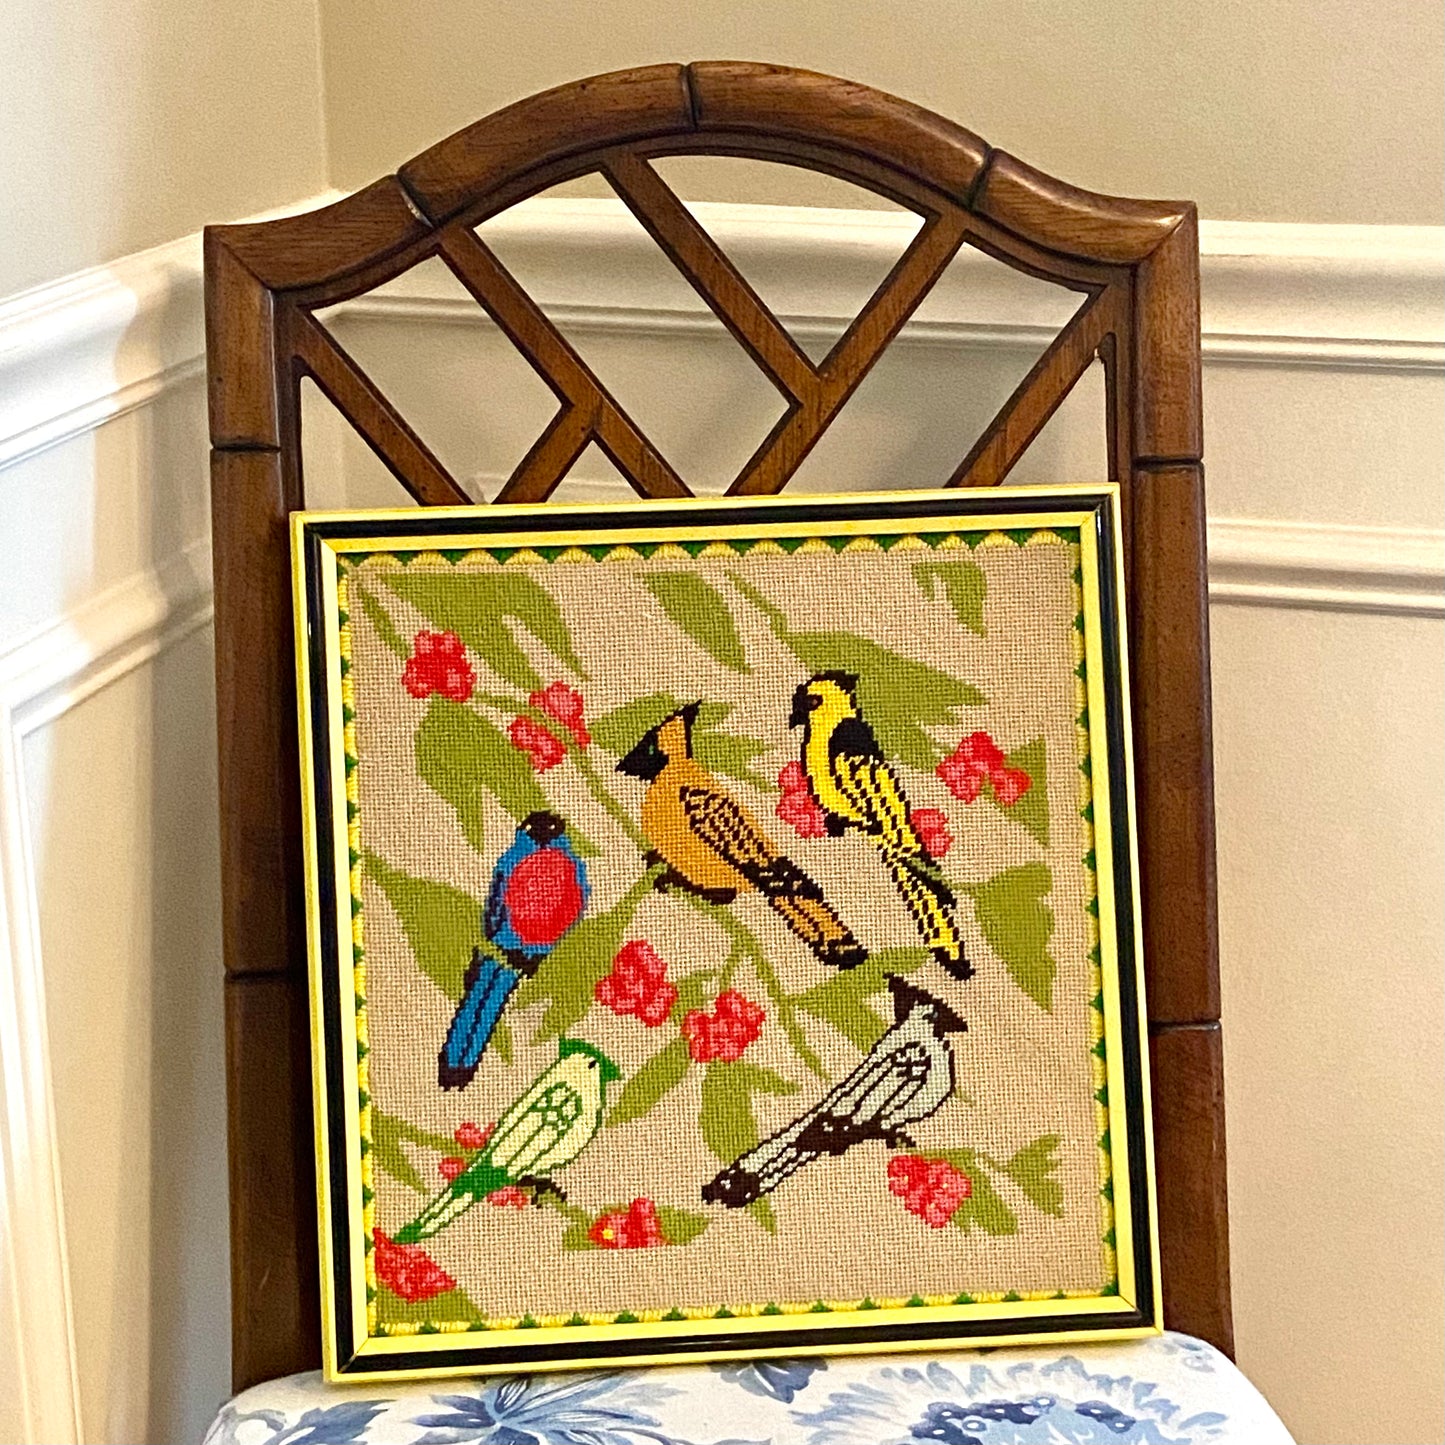 Vintage chinoiserie chic style framed needlepoint wall art